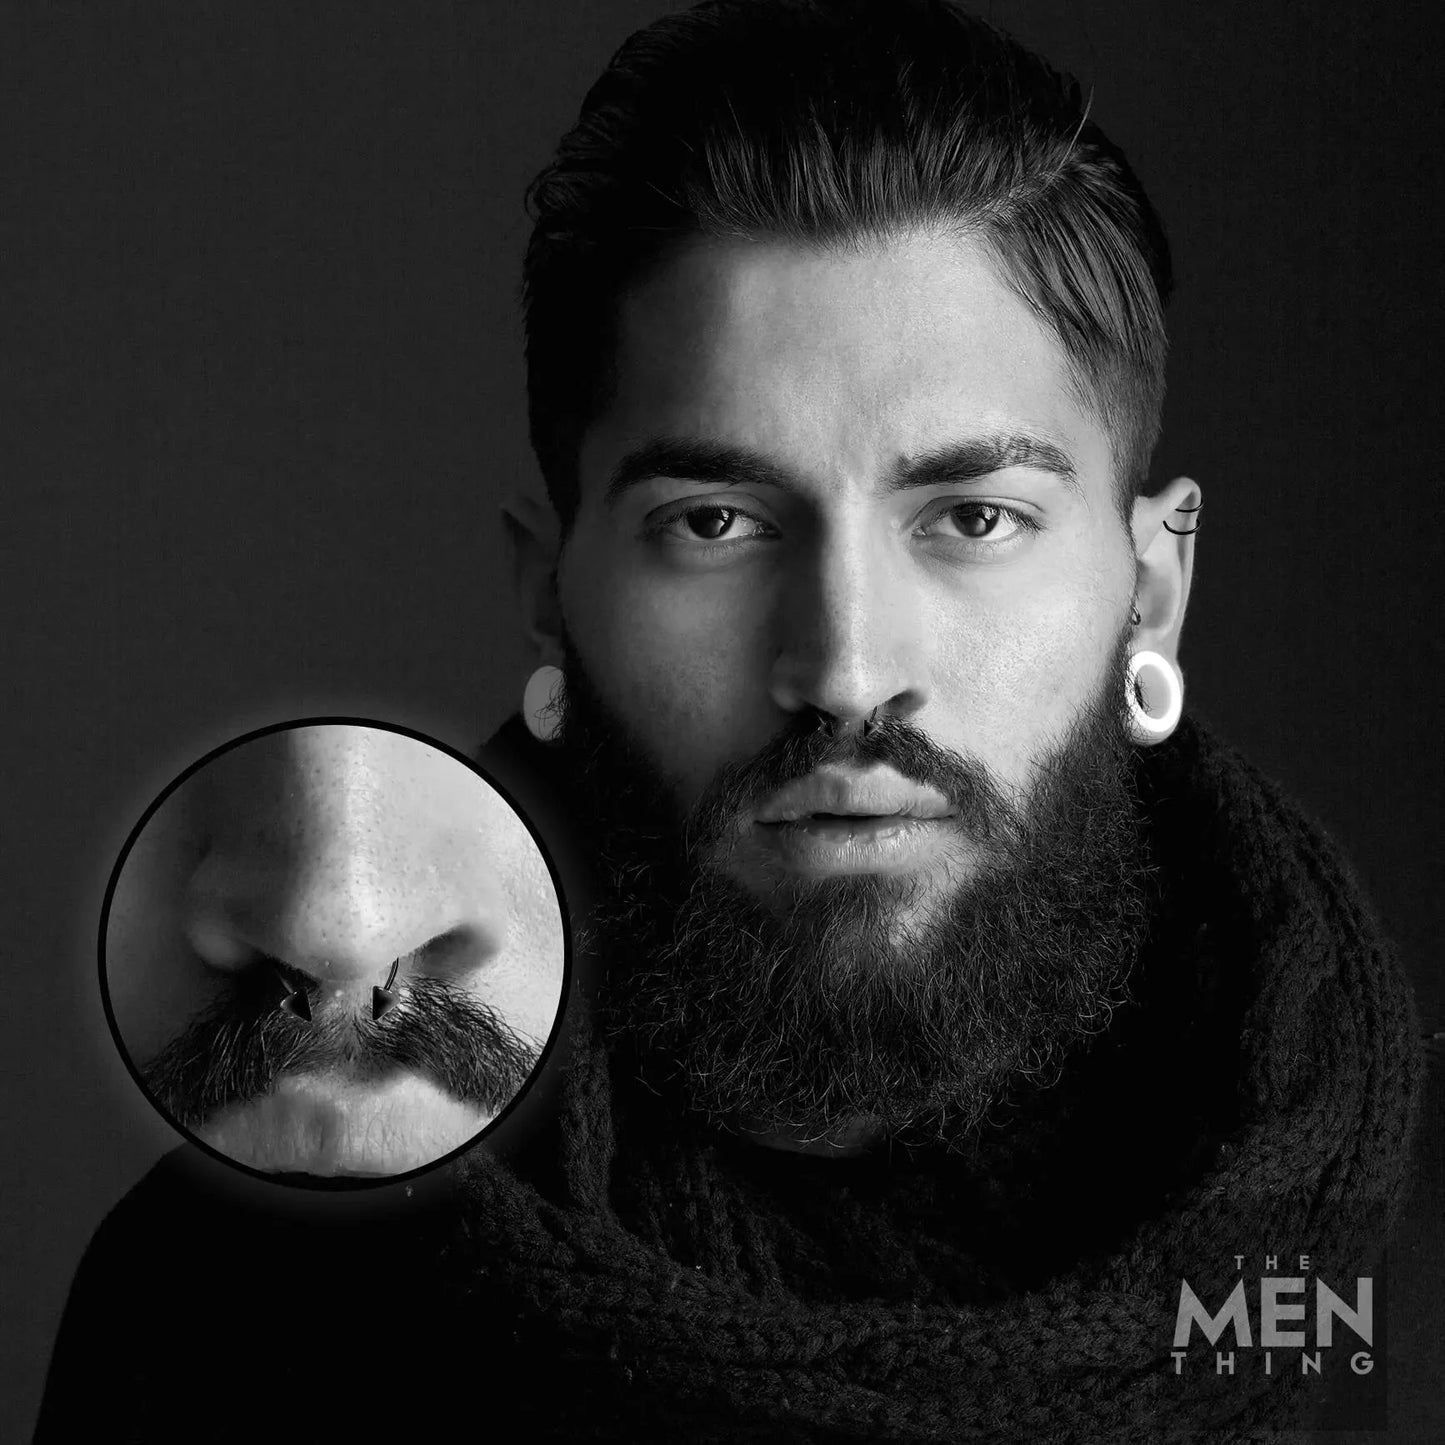 THE MEN THING Fake Nose Rings – Pure Stainless Steel Non Piercing Fake Cartilage Earring - Faux Nose Ring for Men and Boys